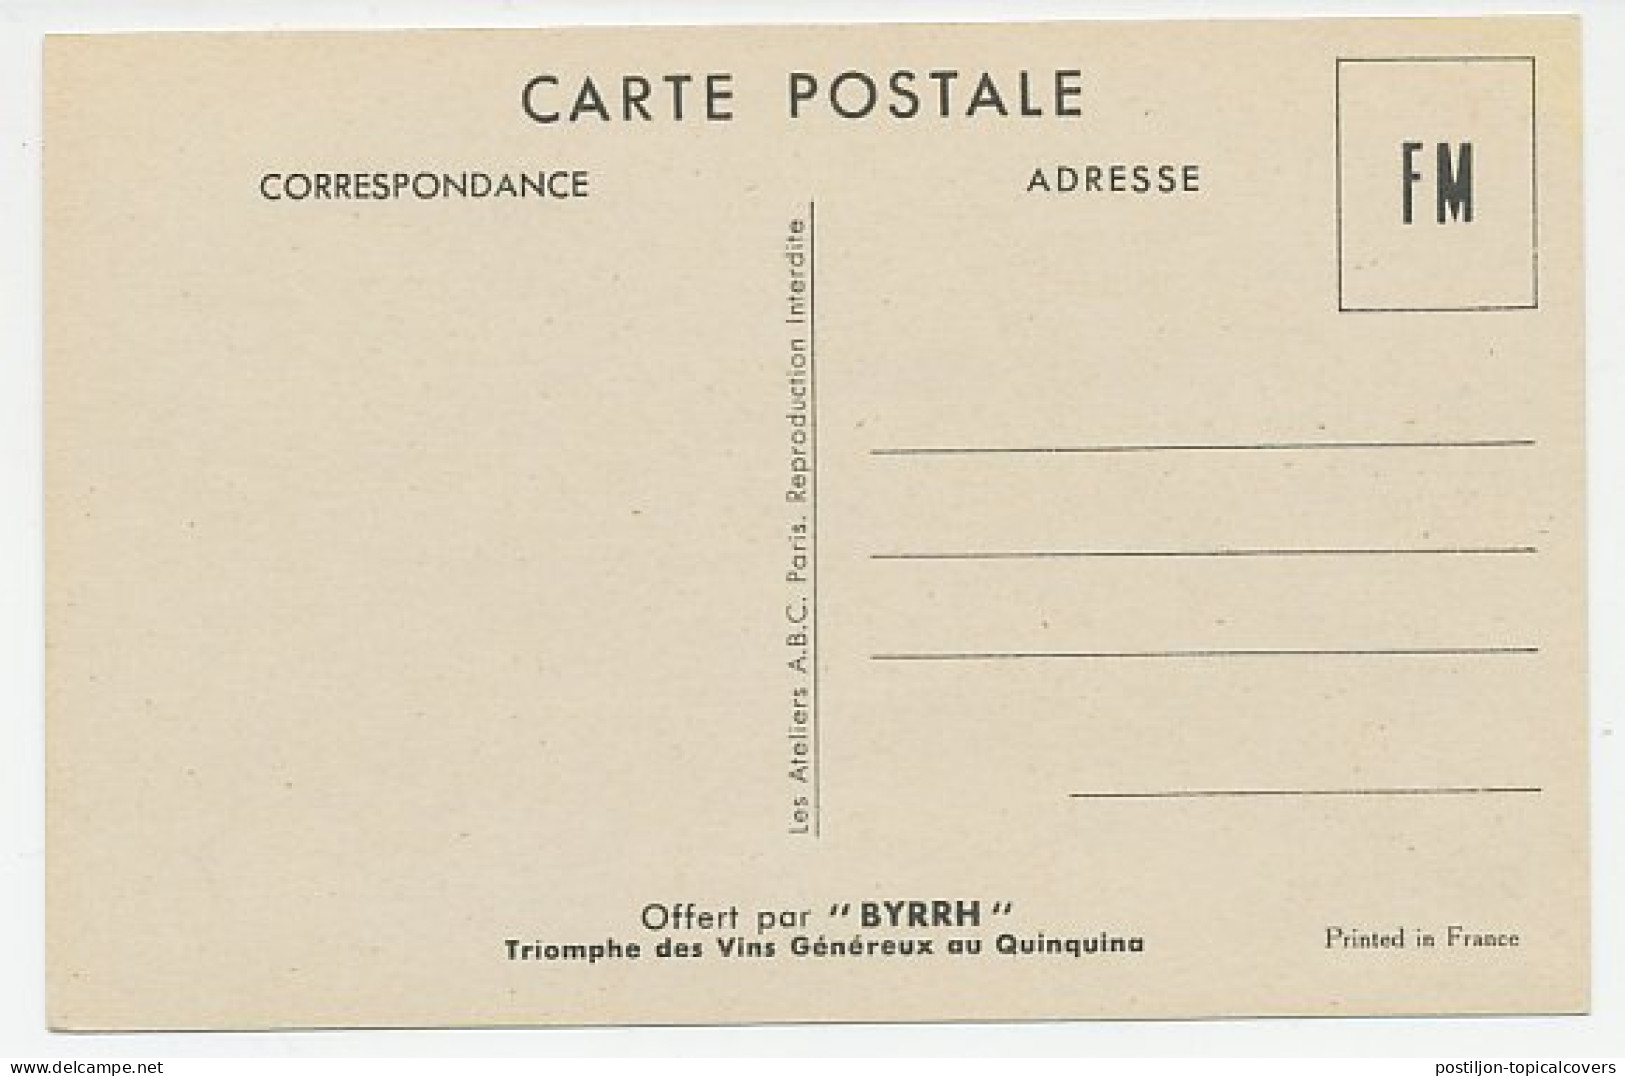 Military Service Card France Soldiers - WWII - WW2